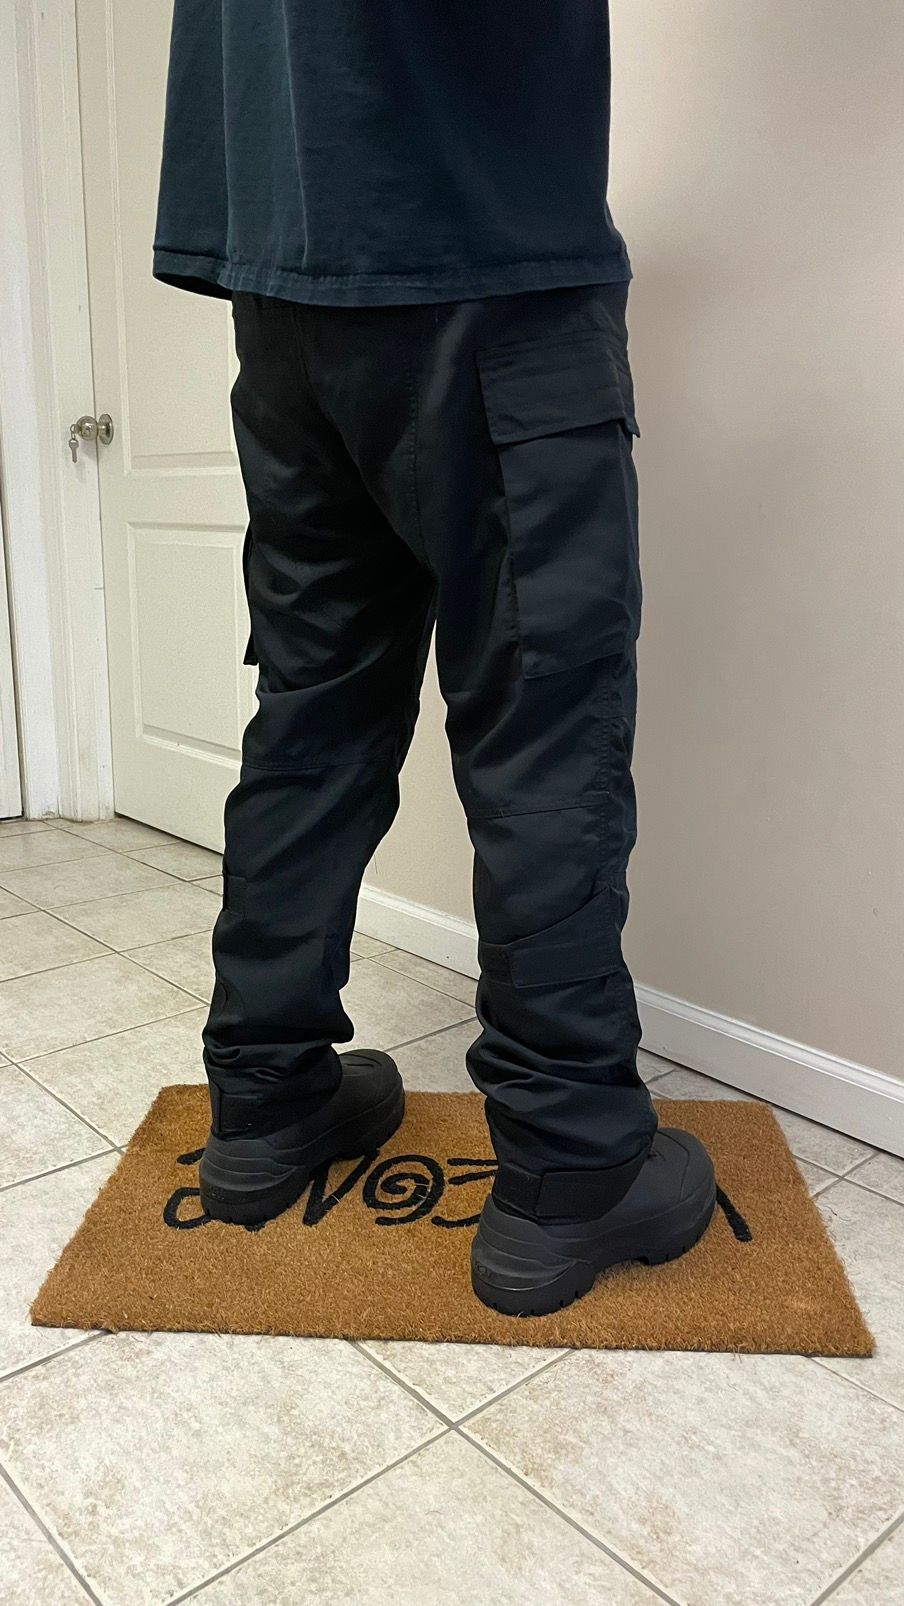 Alyx Alyx Black Tactical Cargo Pants Size US 33 - 1 Preview